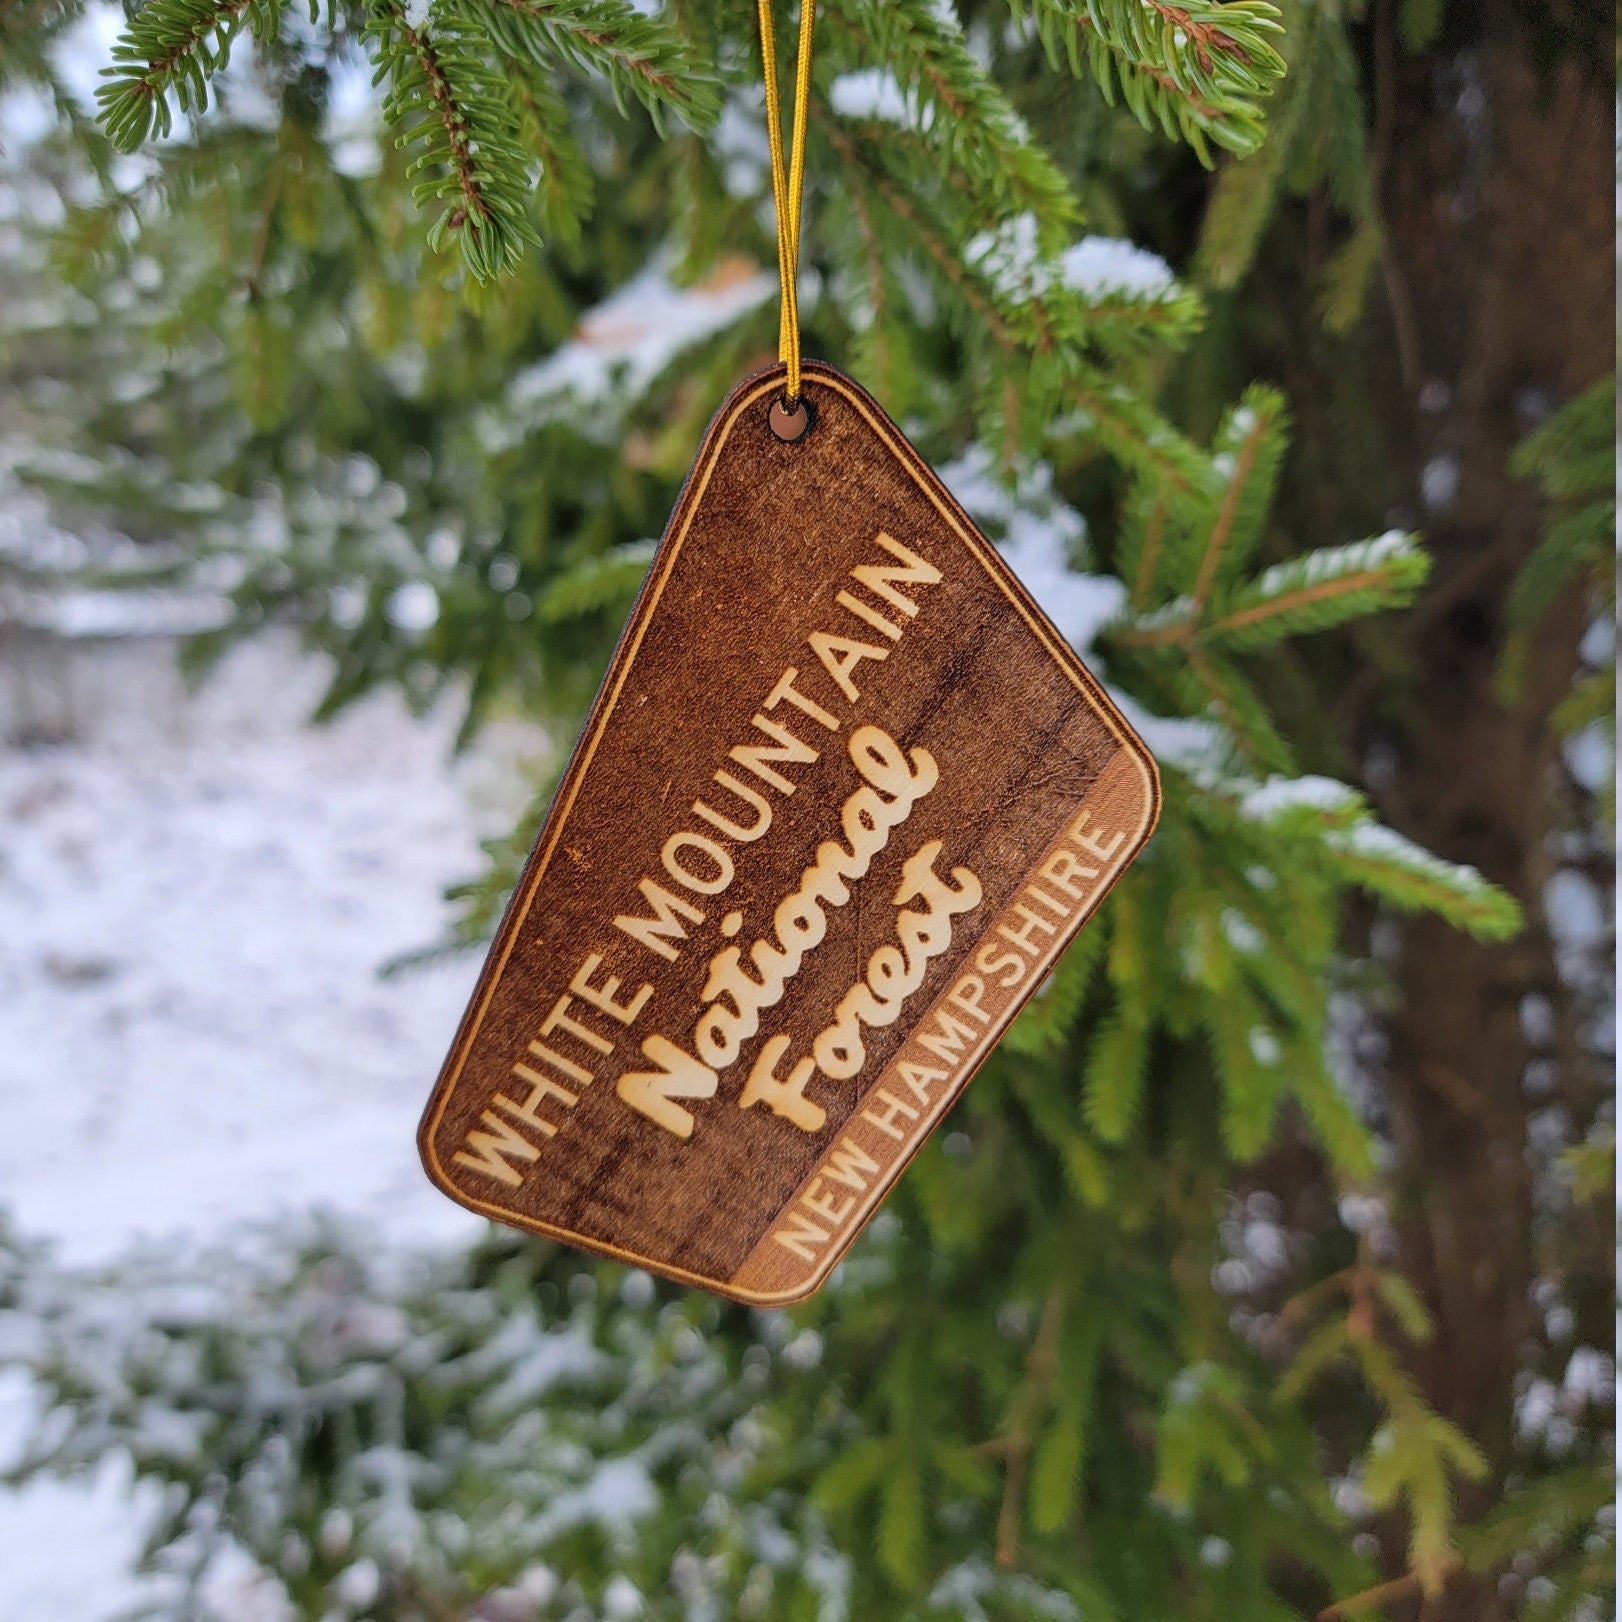 White Mountain National Forest Wood Keychain or Ornament New Hampshire